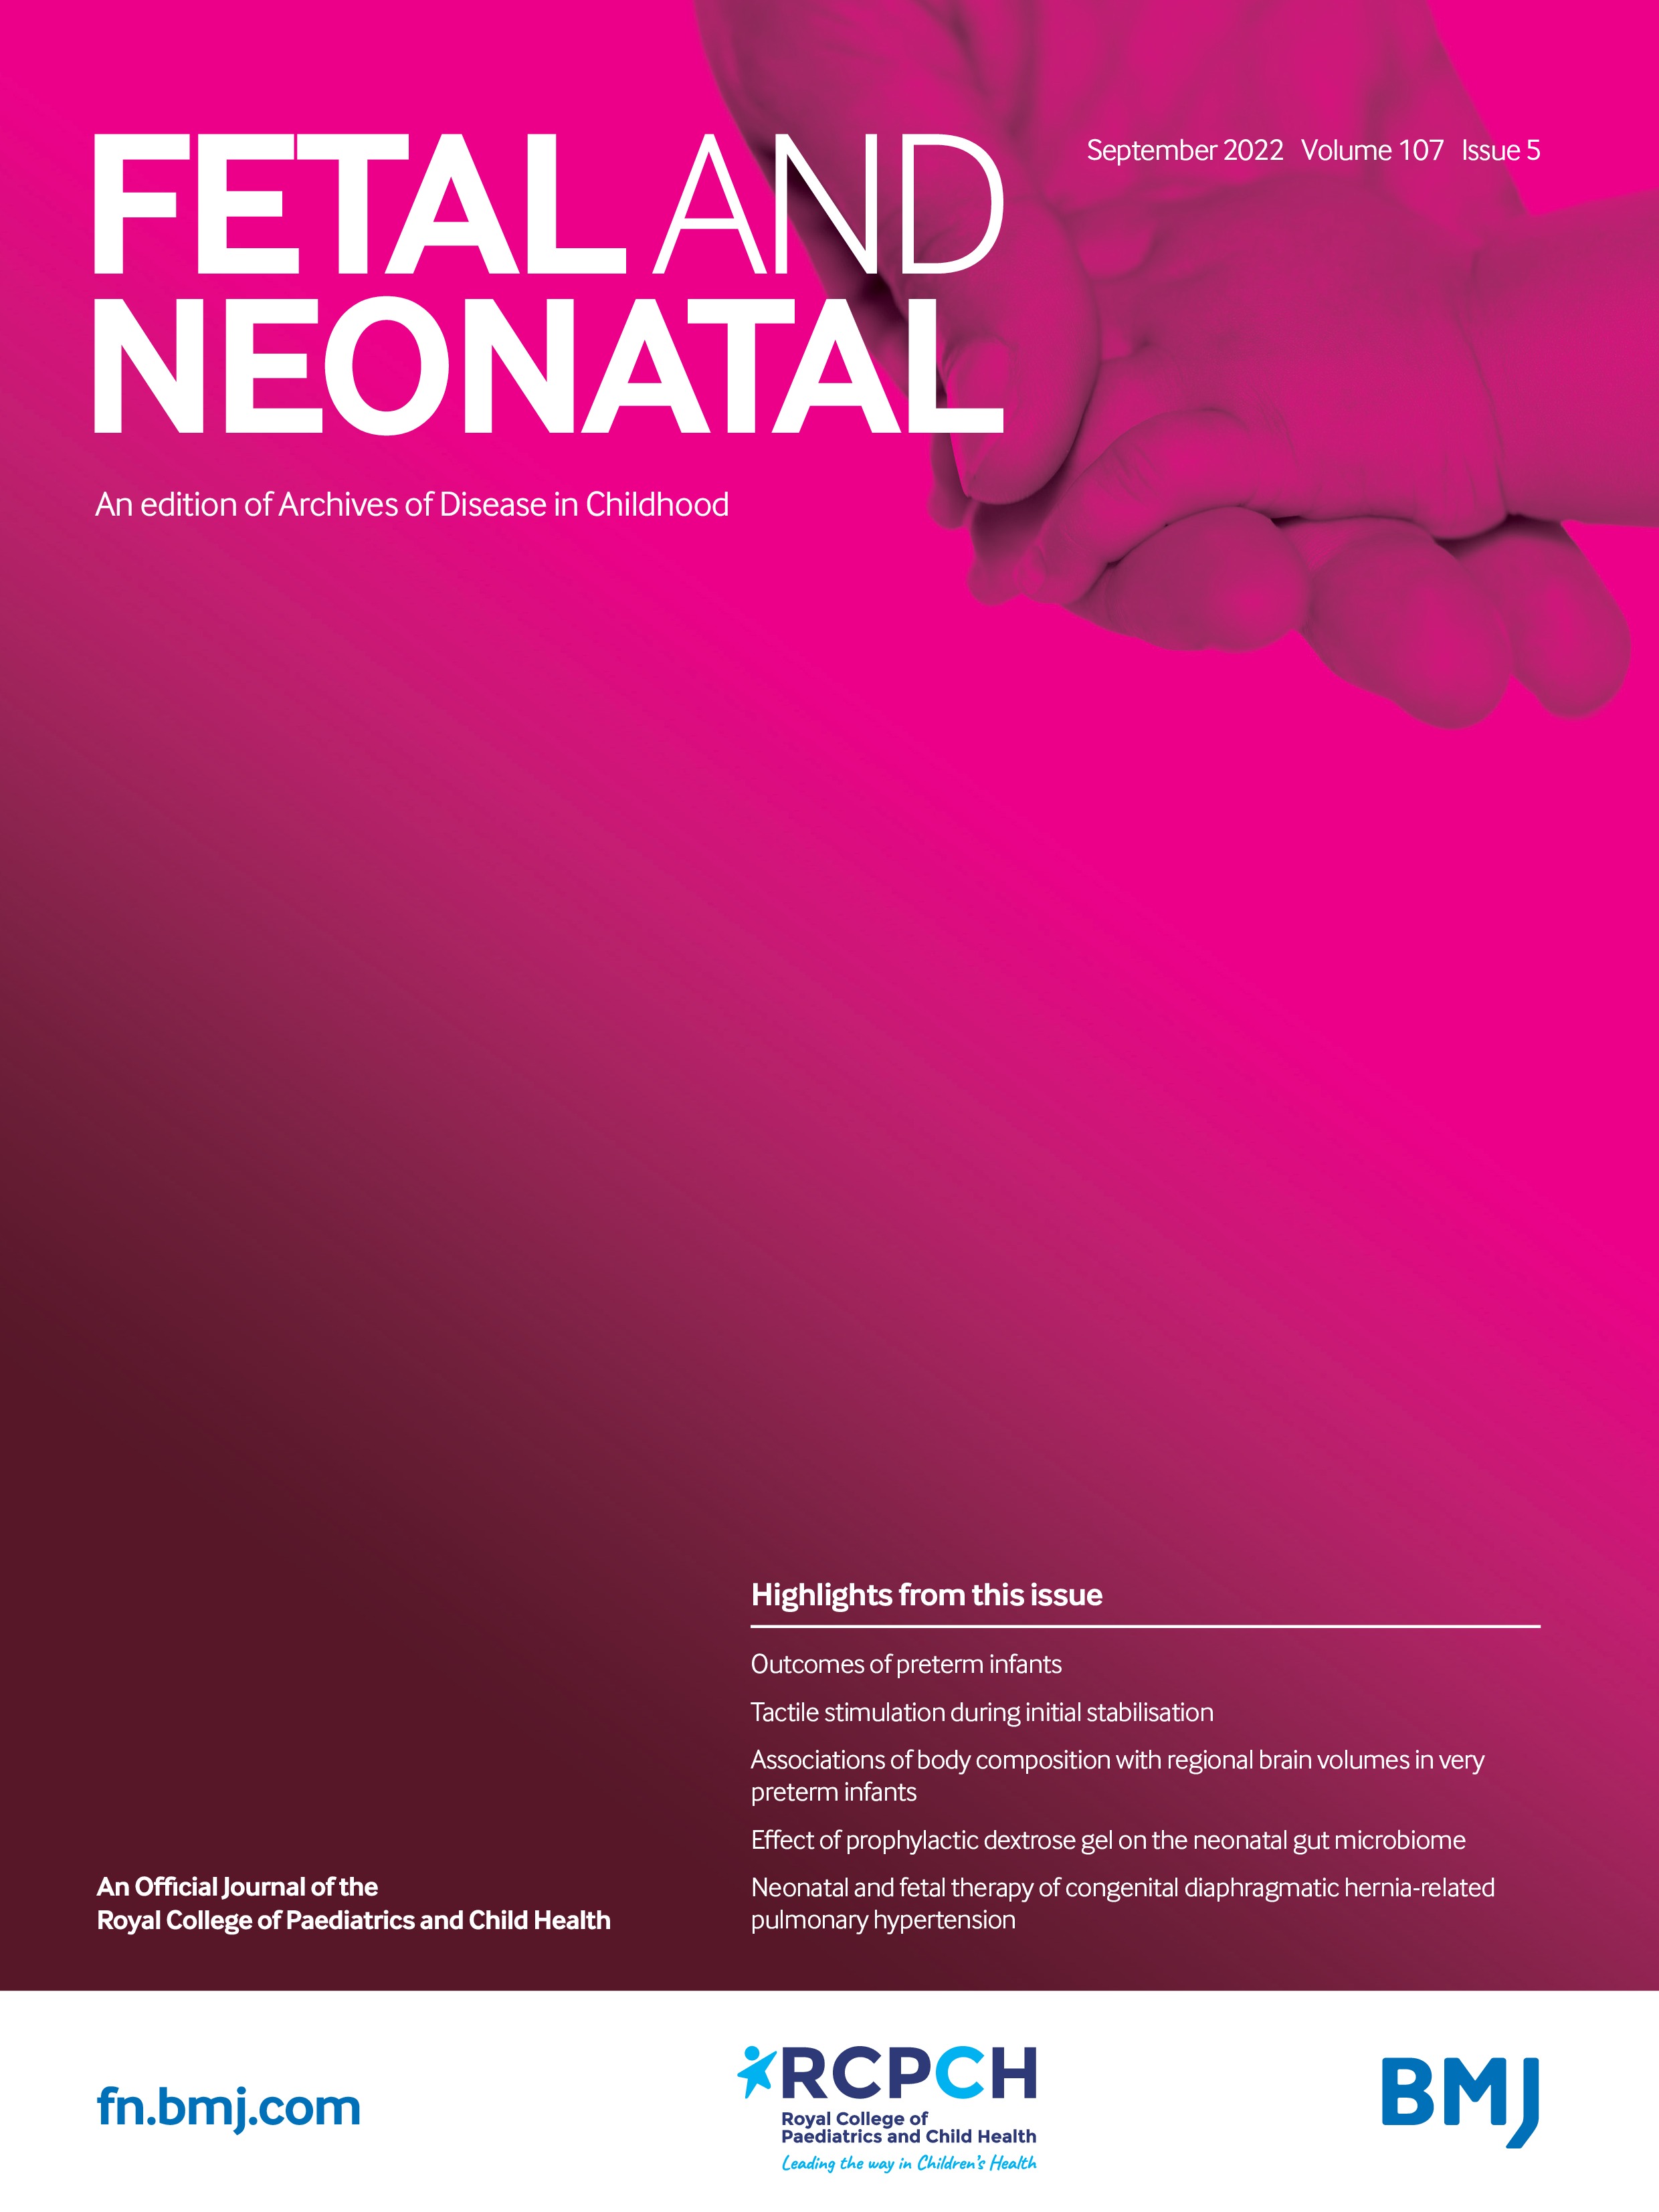 Dual-site blood culture yield and time to positivity in neonatal late-onset sepsis